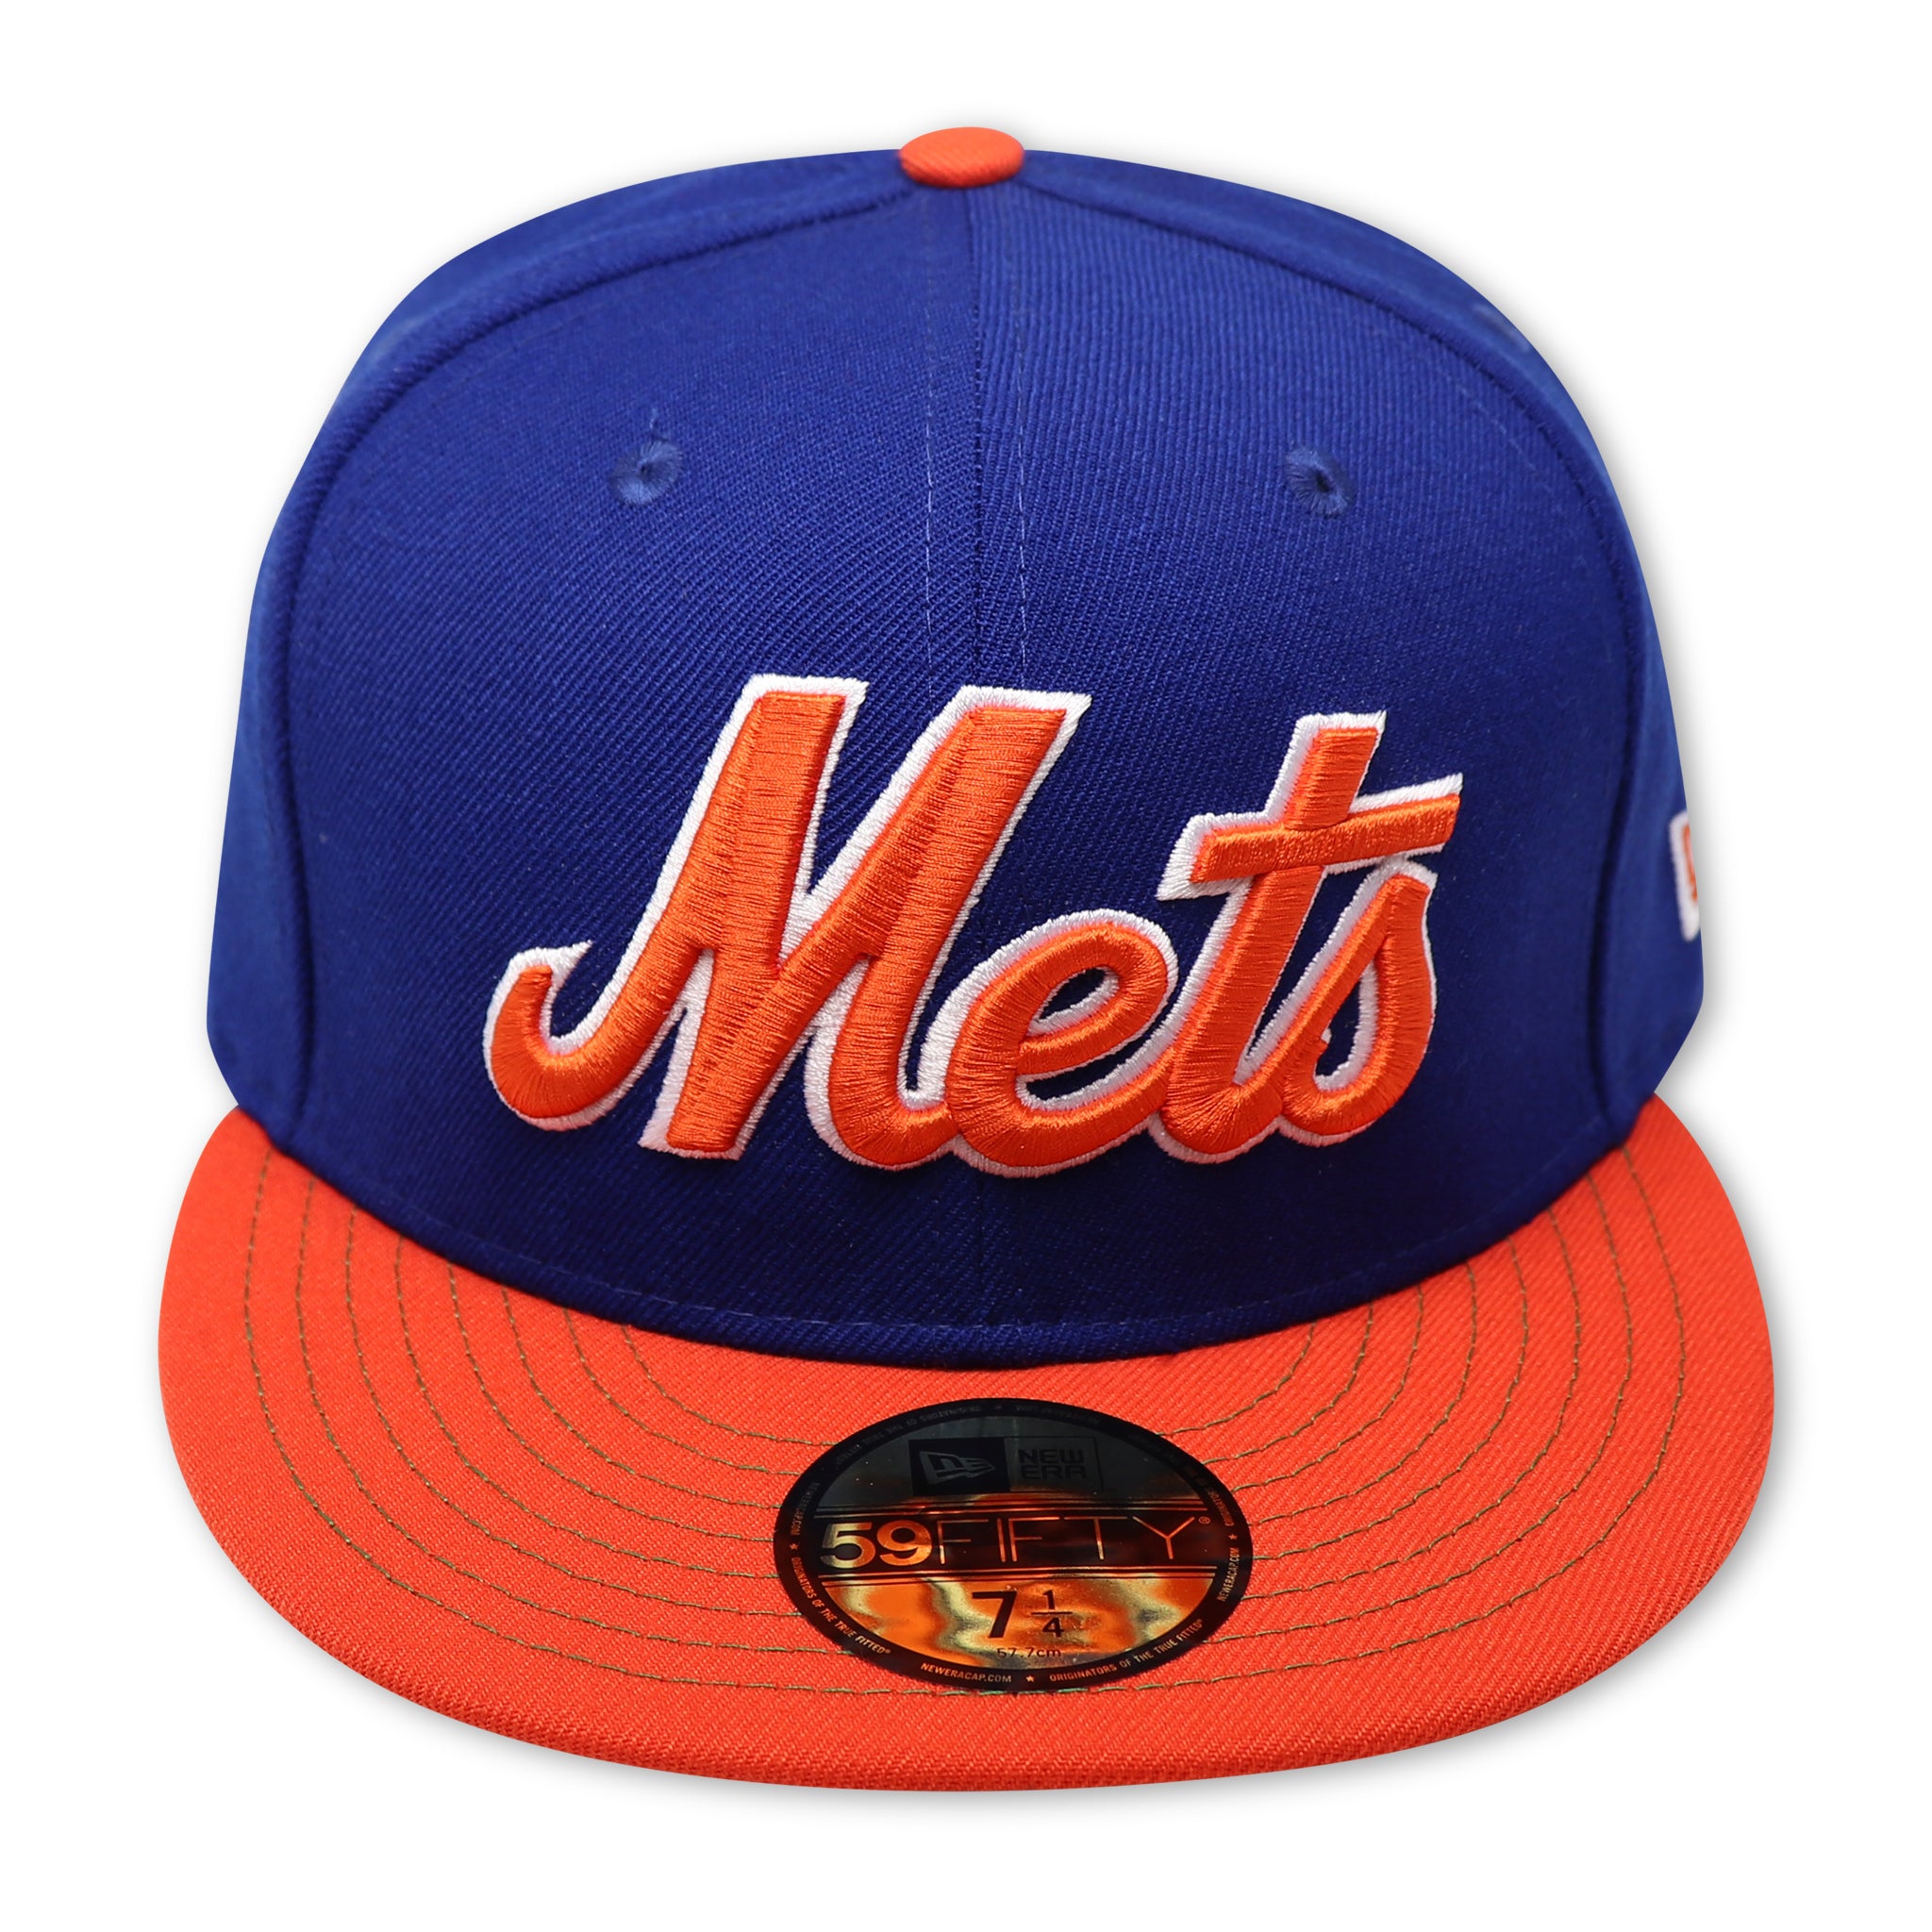 NEW YORK METS "JERSEY LOGO" NEW ERA 59FIFTY FITTED